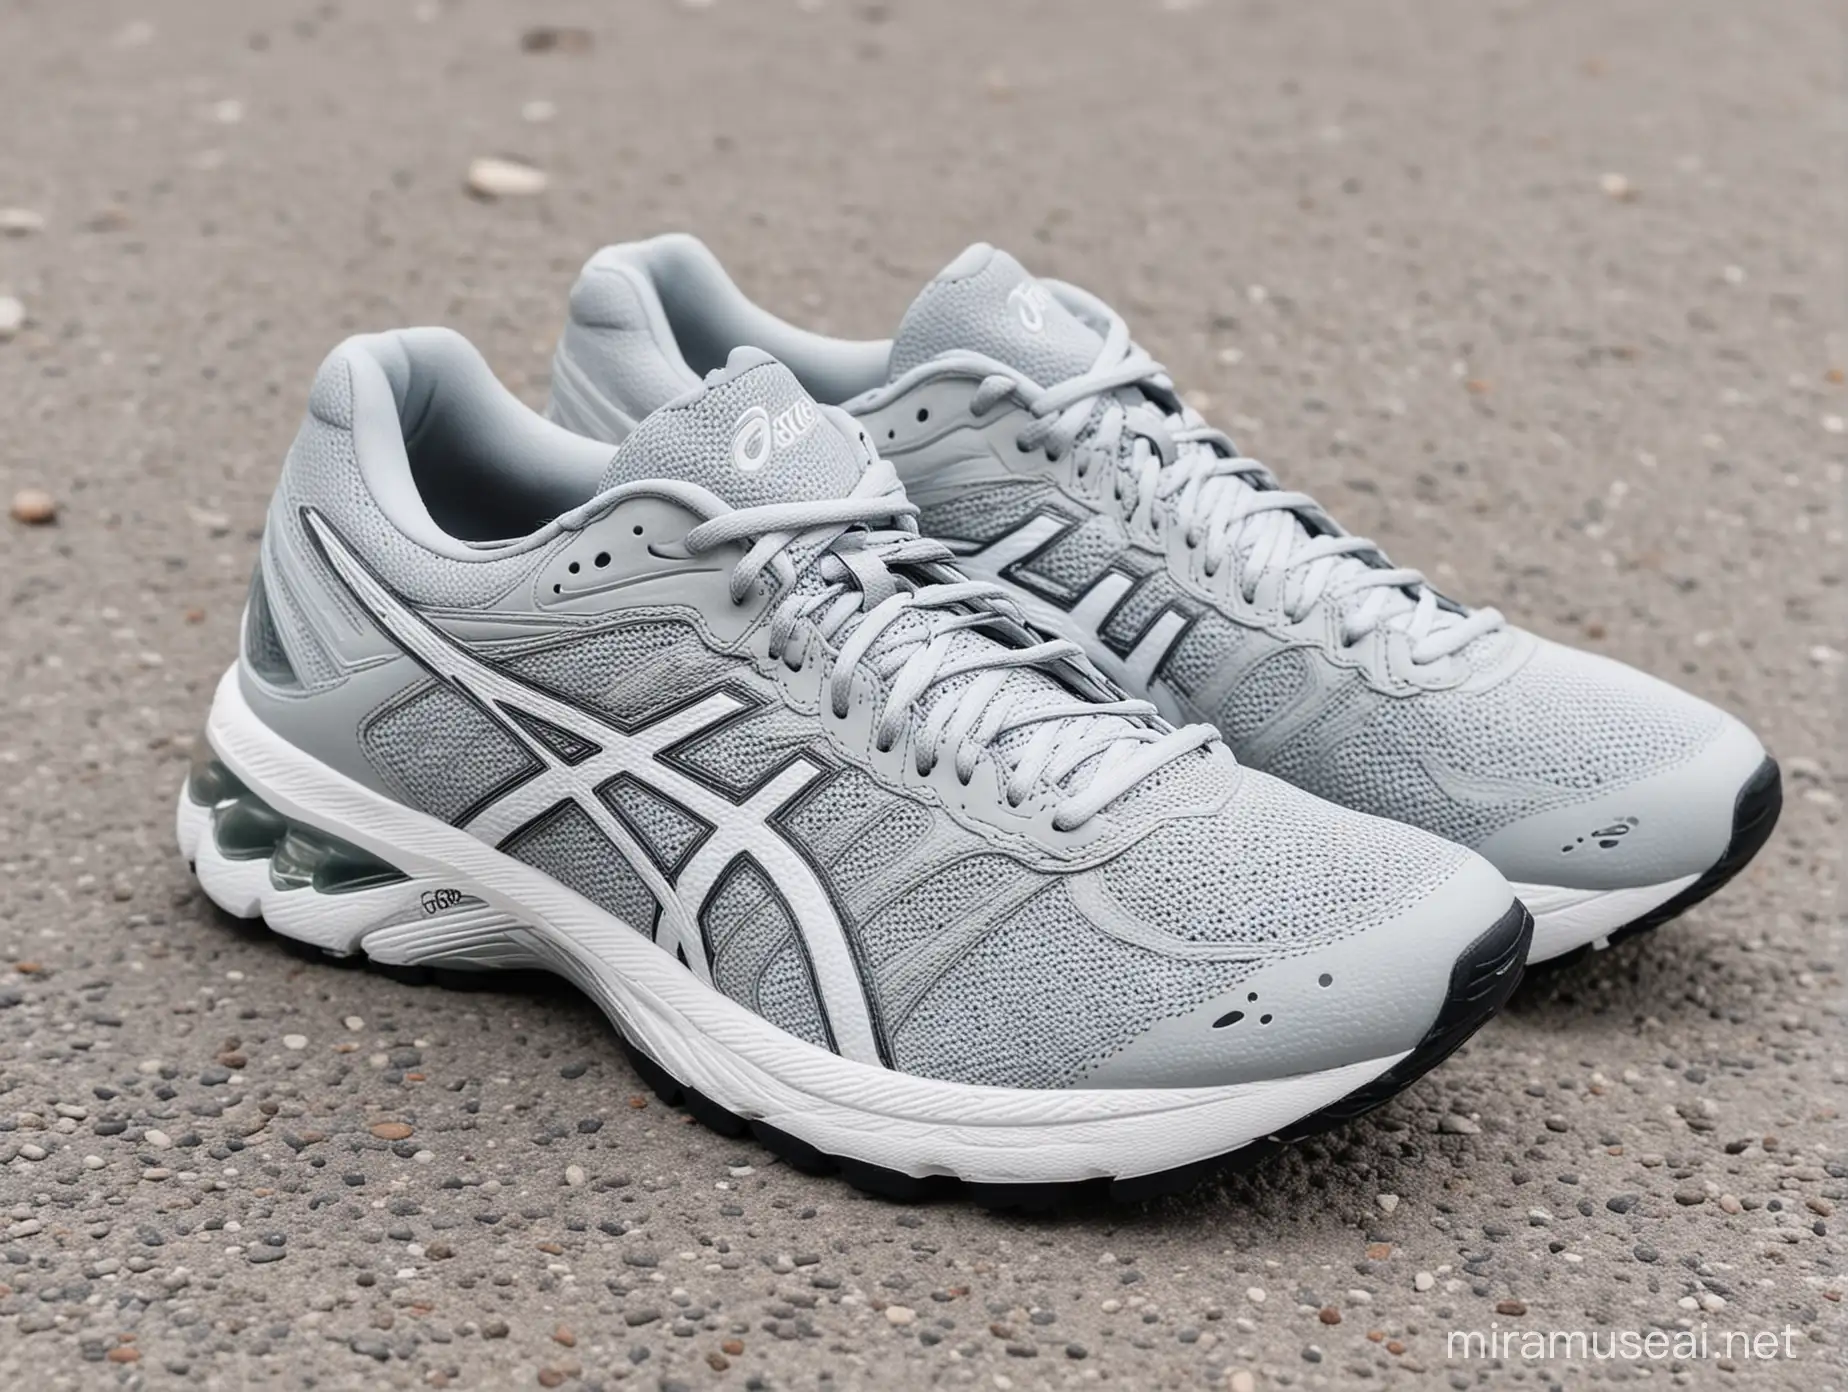 Asics GT1000 12 Running Shoes on Light Grey Background